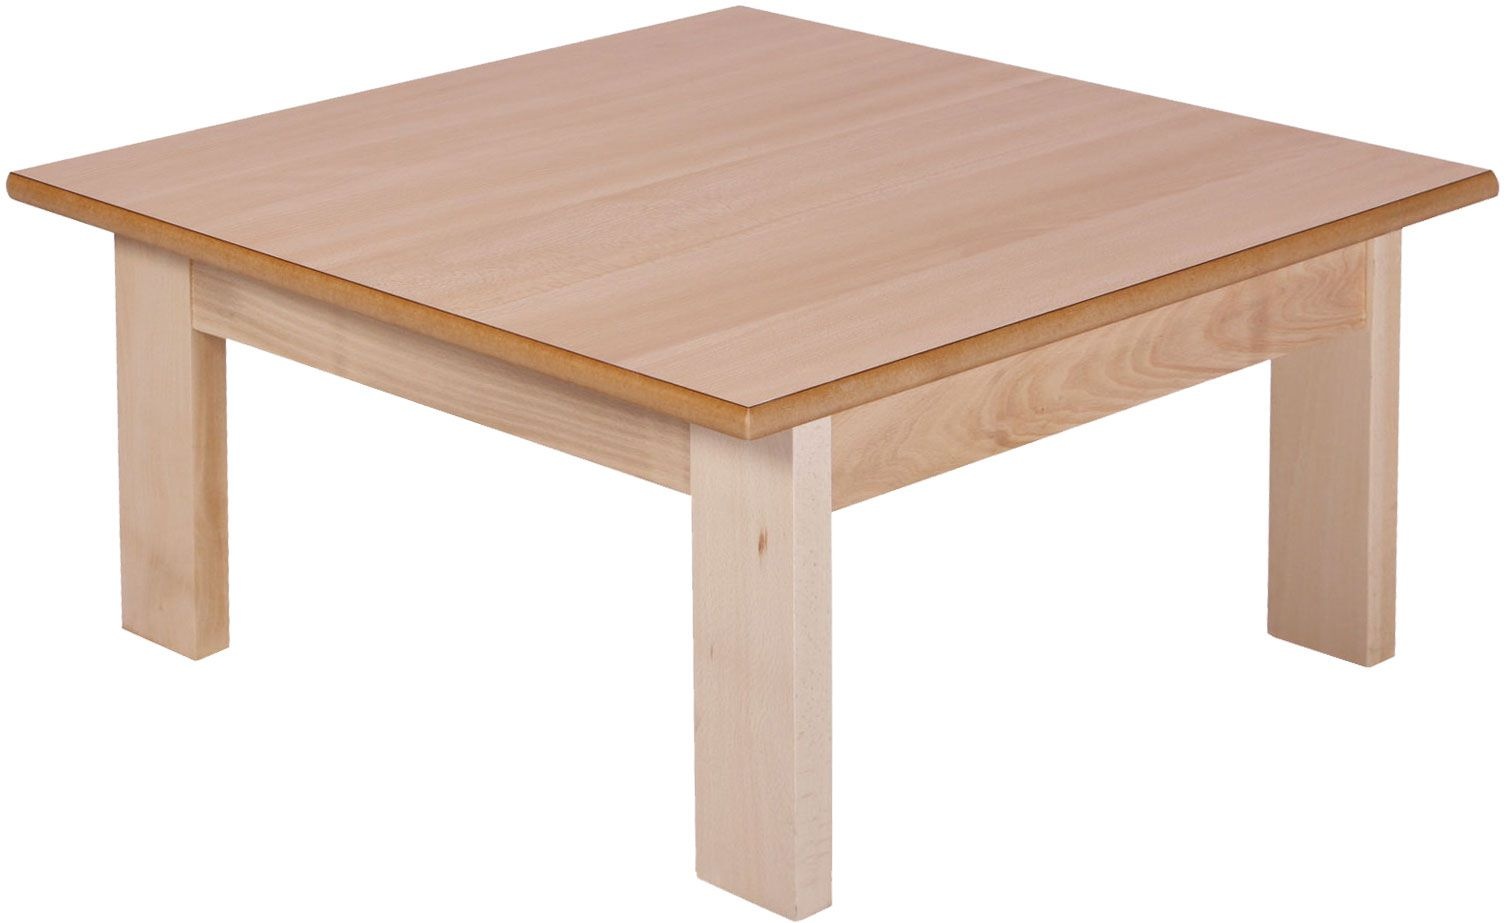 Deluxe Solid Beech Wooden Coffee Table Coffee Tables